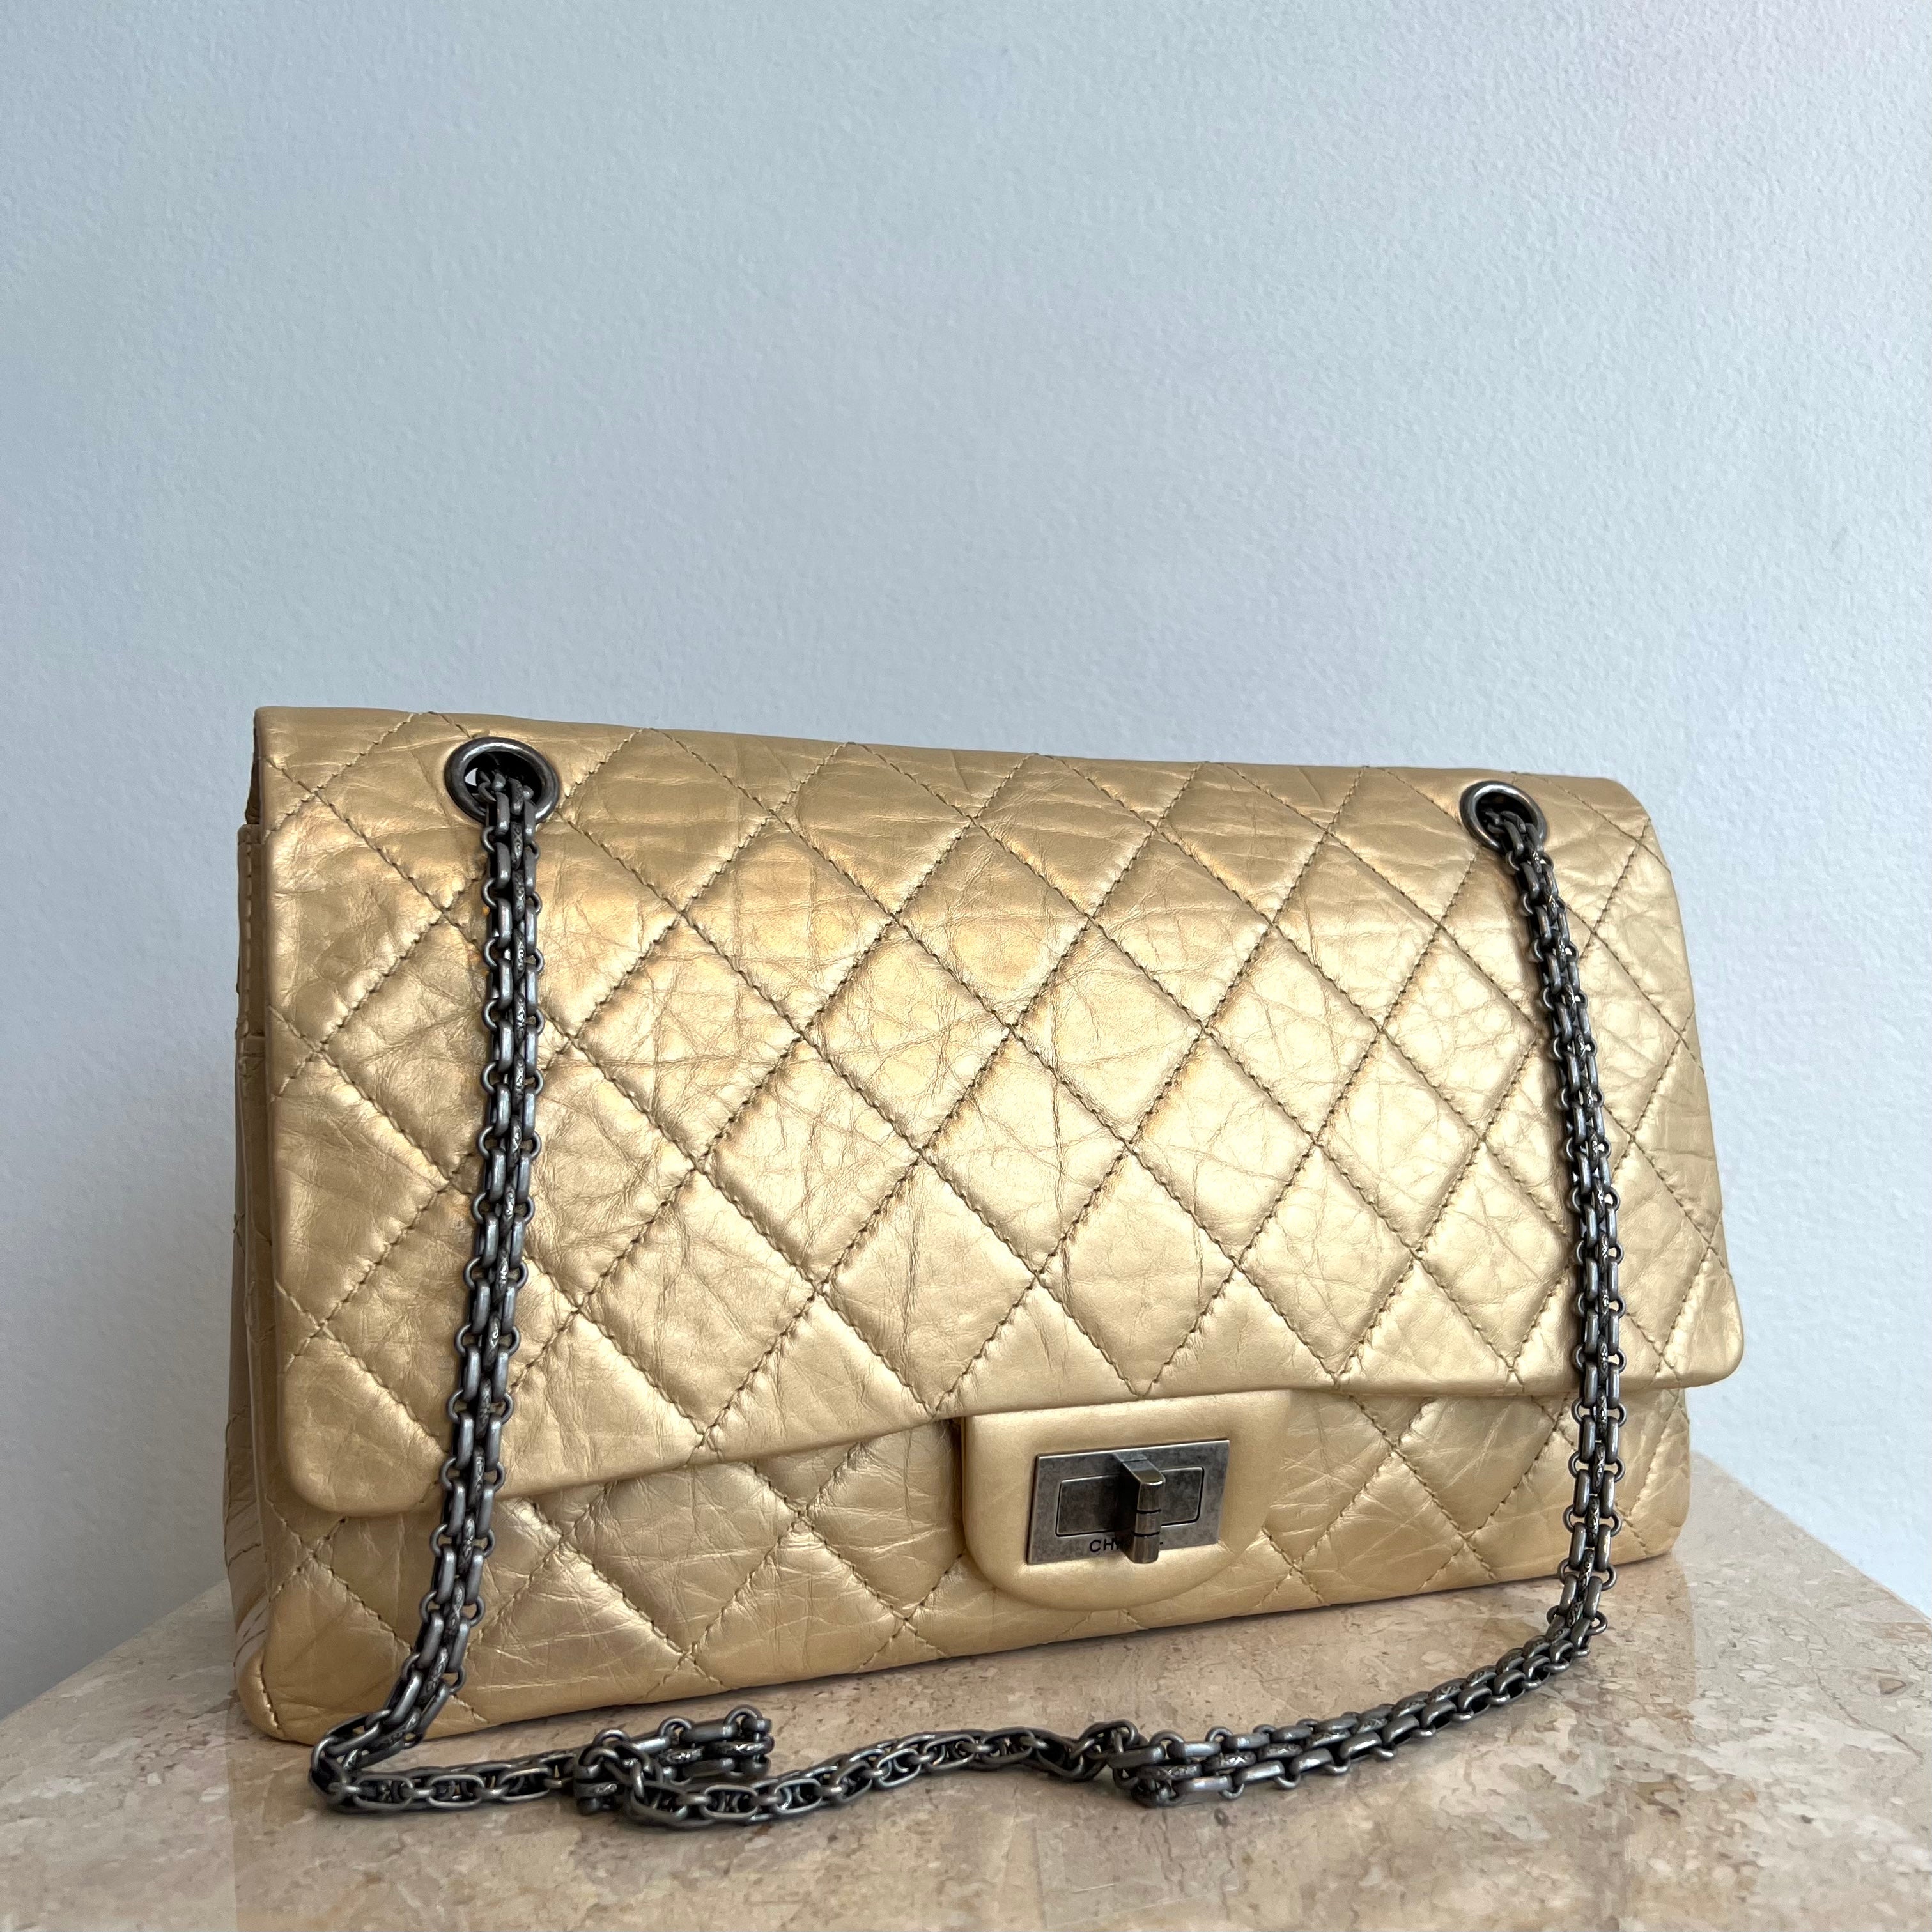 Pre-Owned CHANEL Gold Aged Calfskin Leather Reissue 226 Double